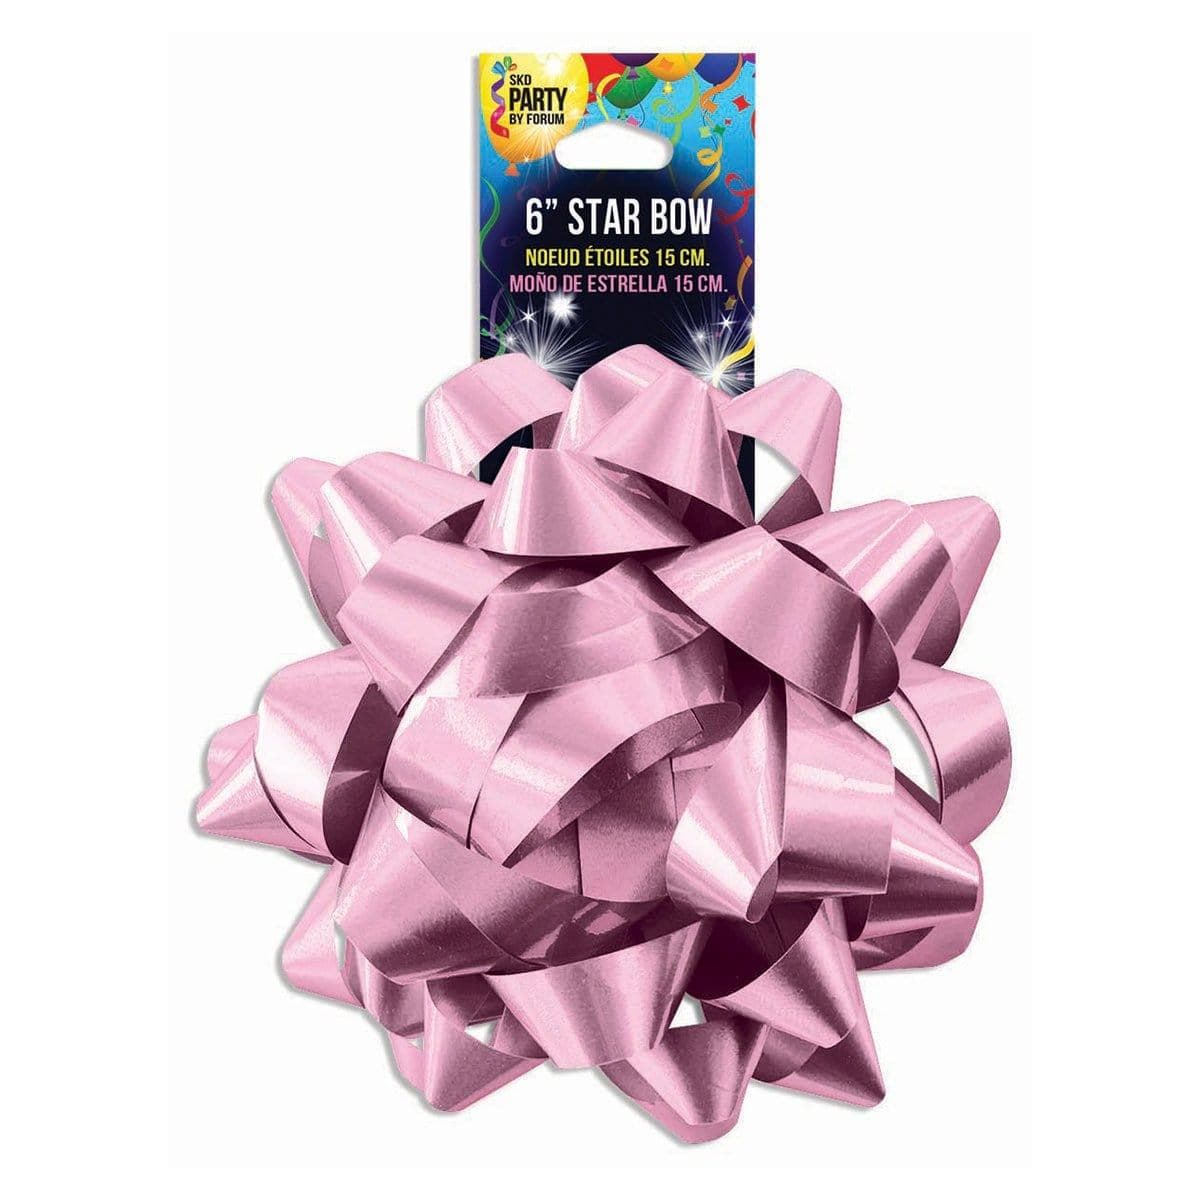 Buy Gift Wrap & Bags Star Bow 6 In. - Light Pink sold at Party Expert